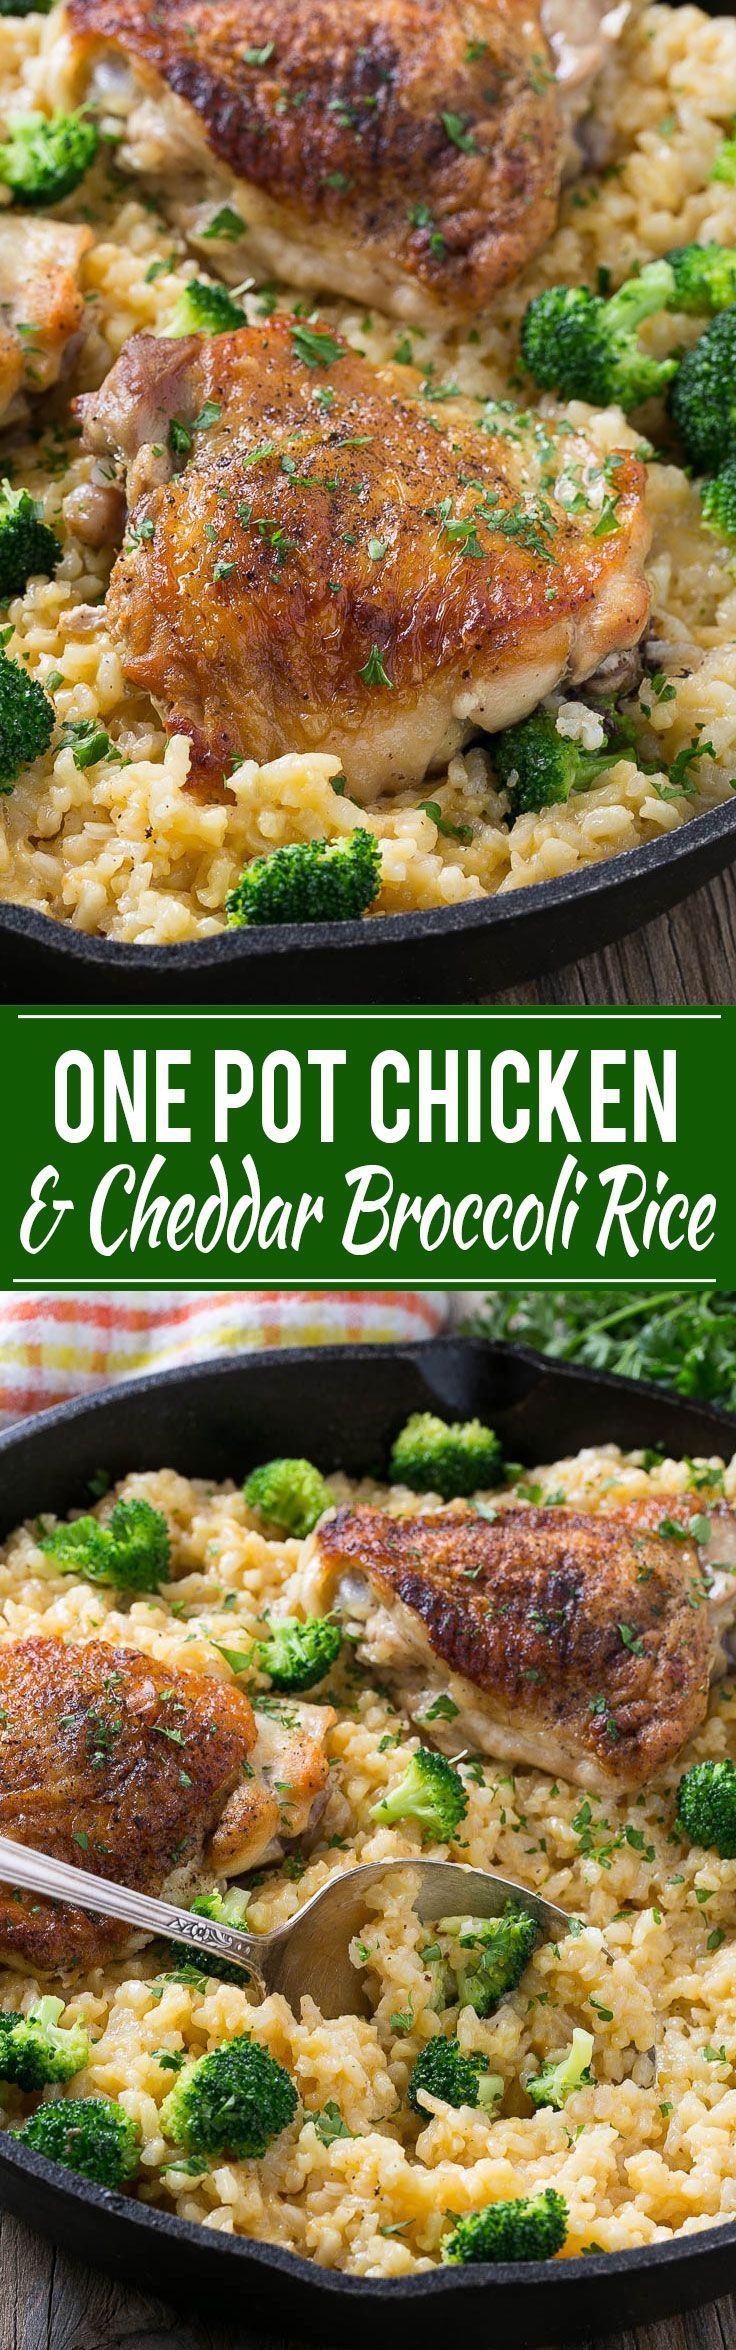 This one pot chicken with cheddar broccoli rice combines classic flavors for a quick and easy dinner. Chicken thighs are cooked